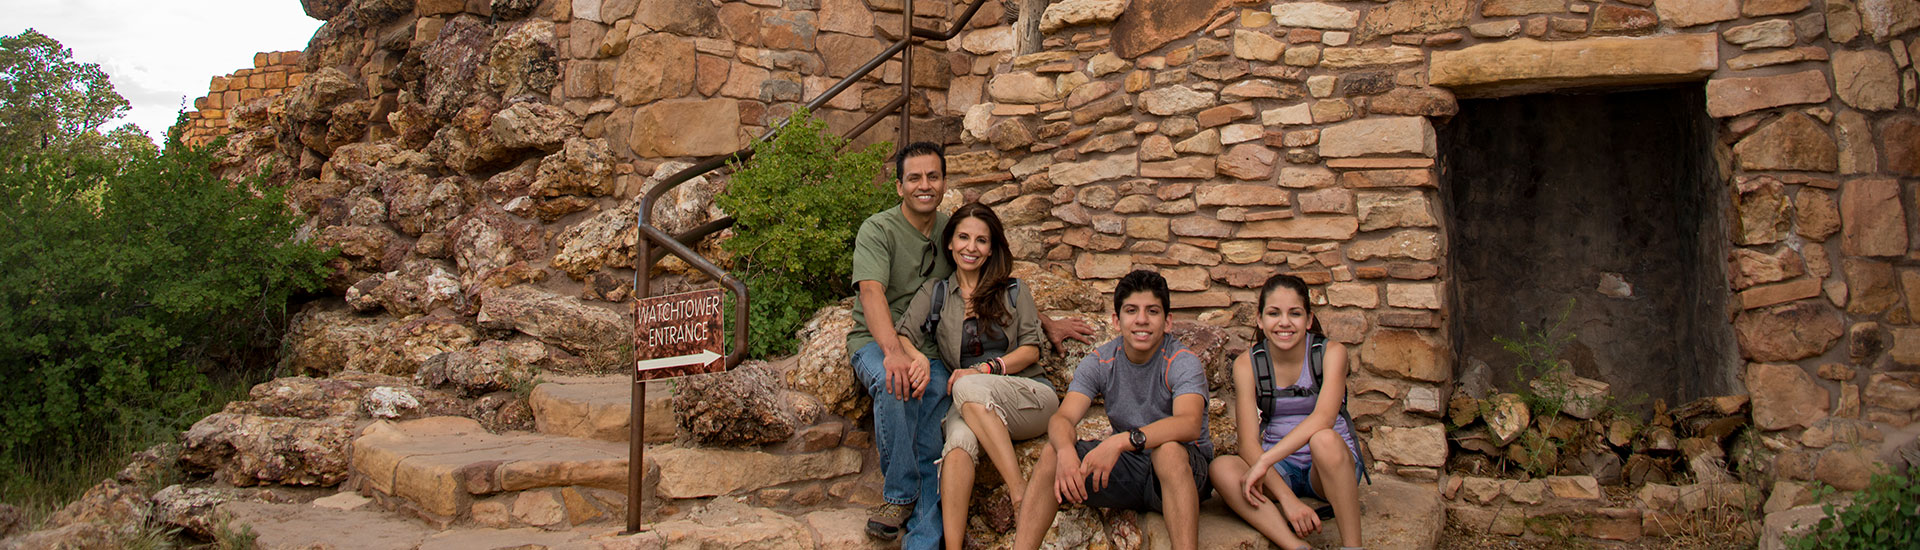 Family of four seated next to the stairs outside the Grand Canyon Desert View Watchtower.